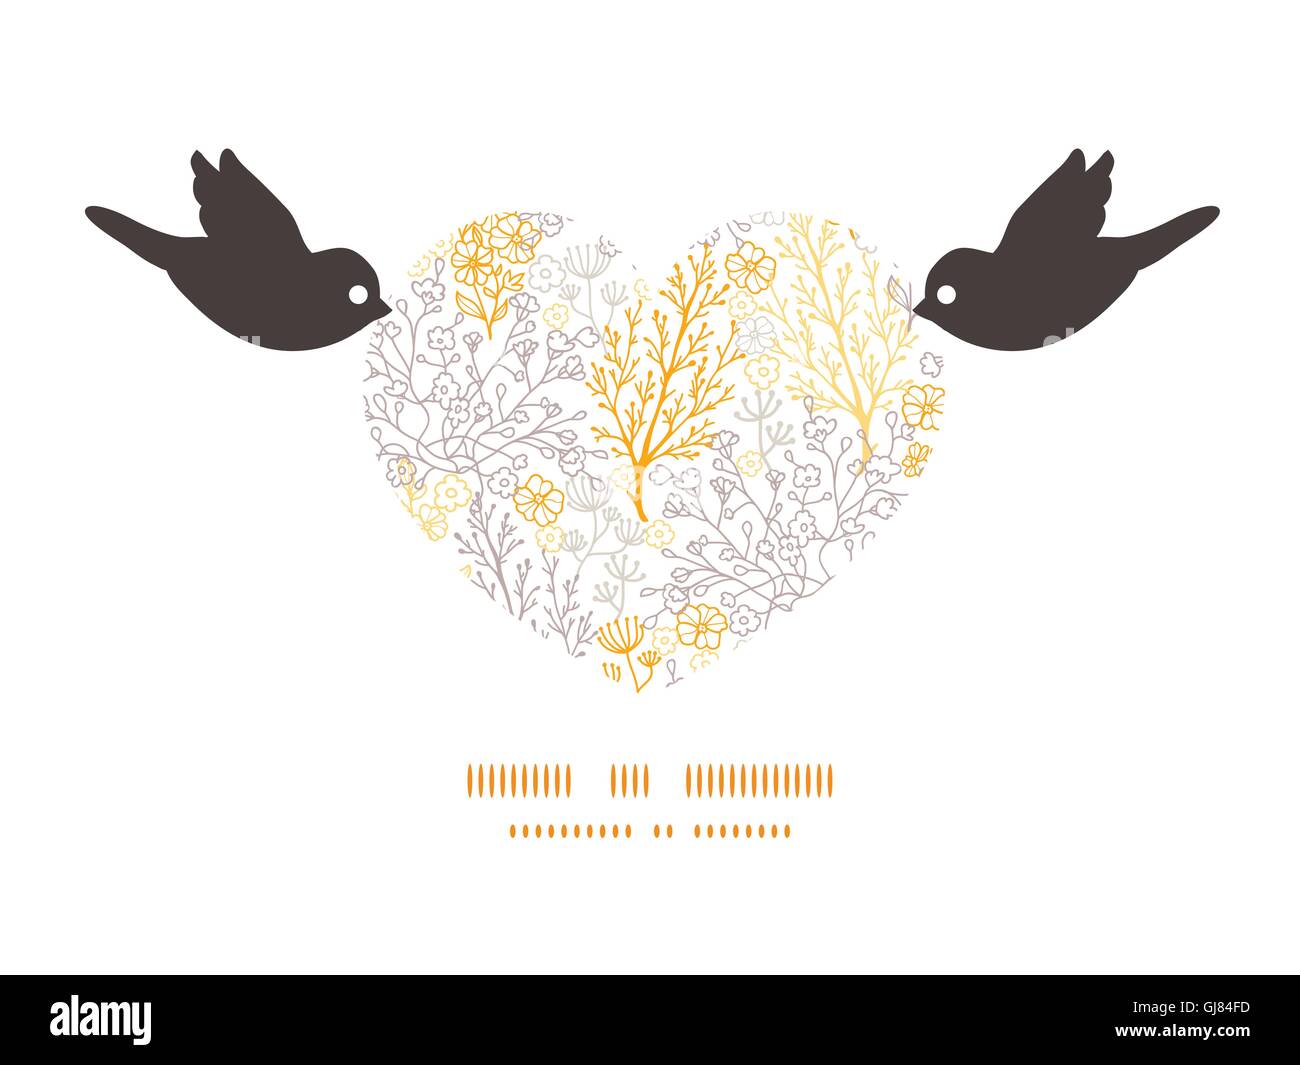 Vector magical floral birds holding heart silhouette frame pattern invitation greeting card template Stock Vector